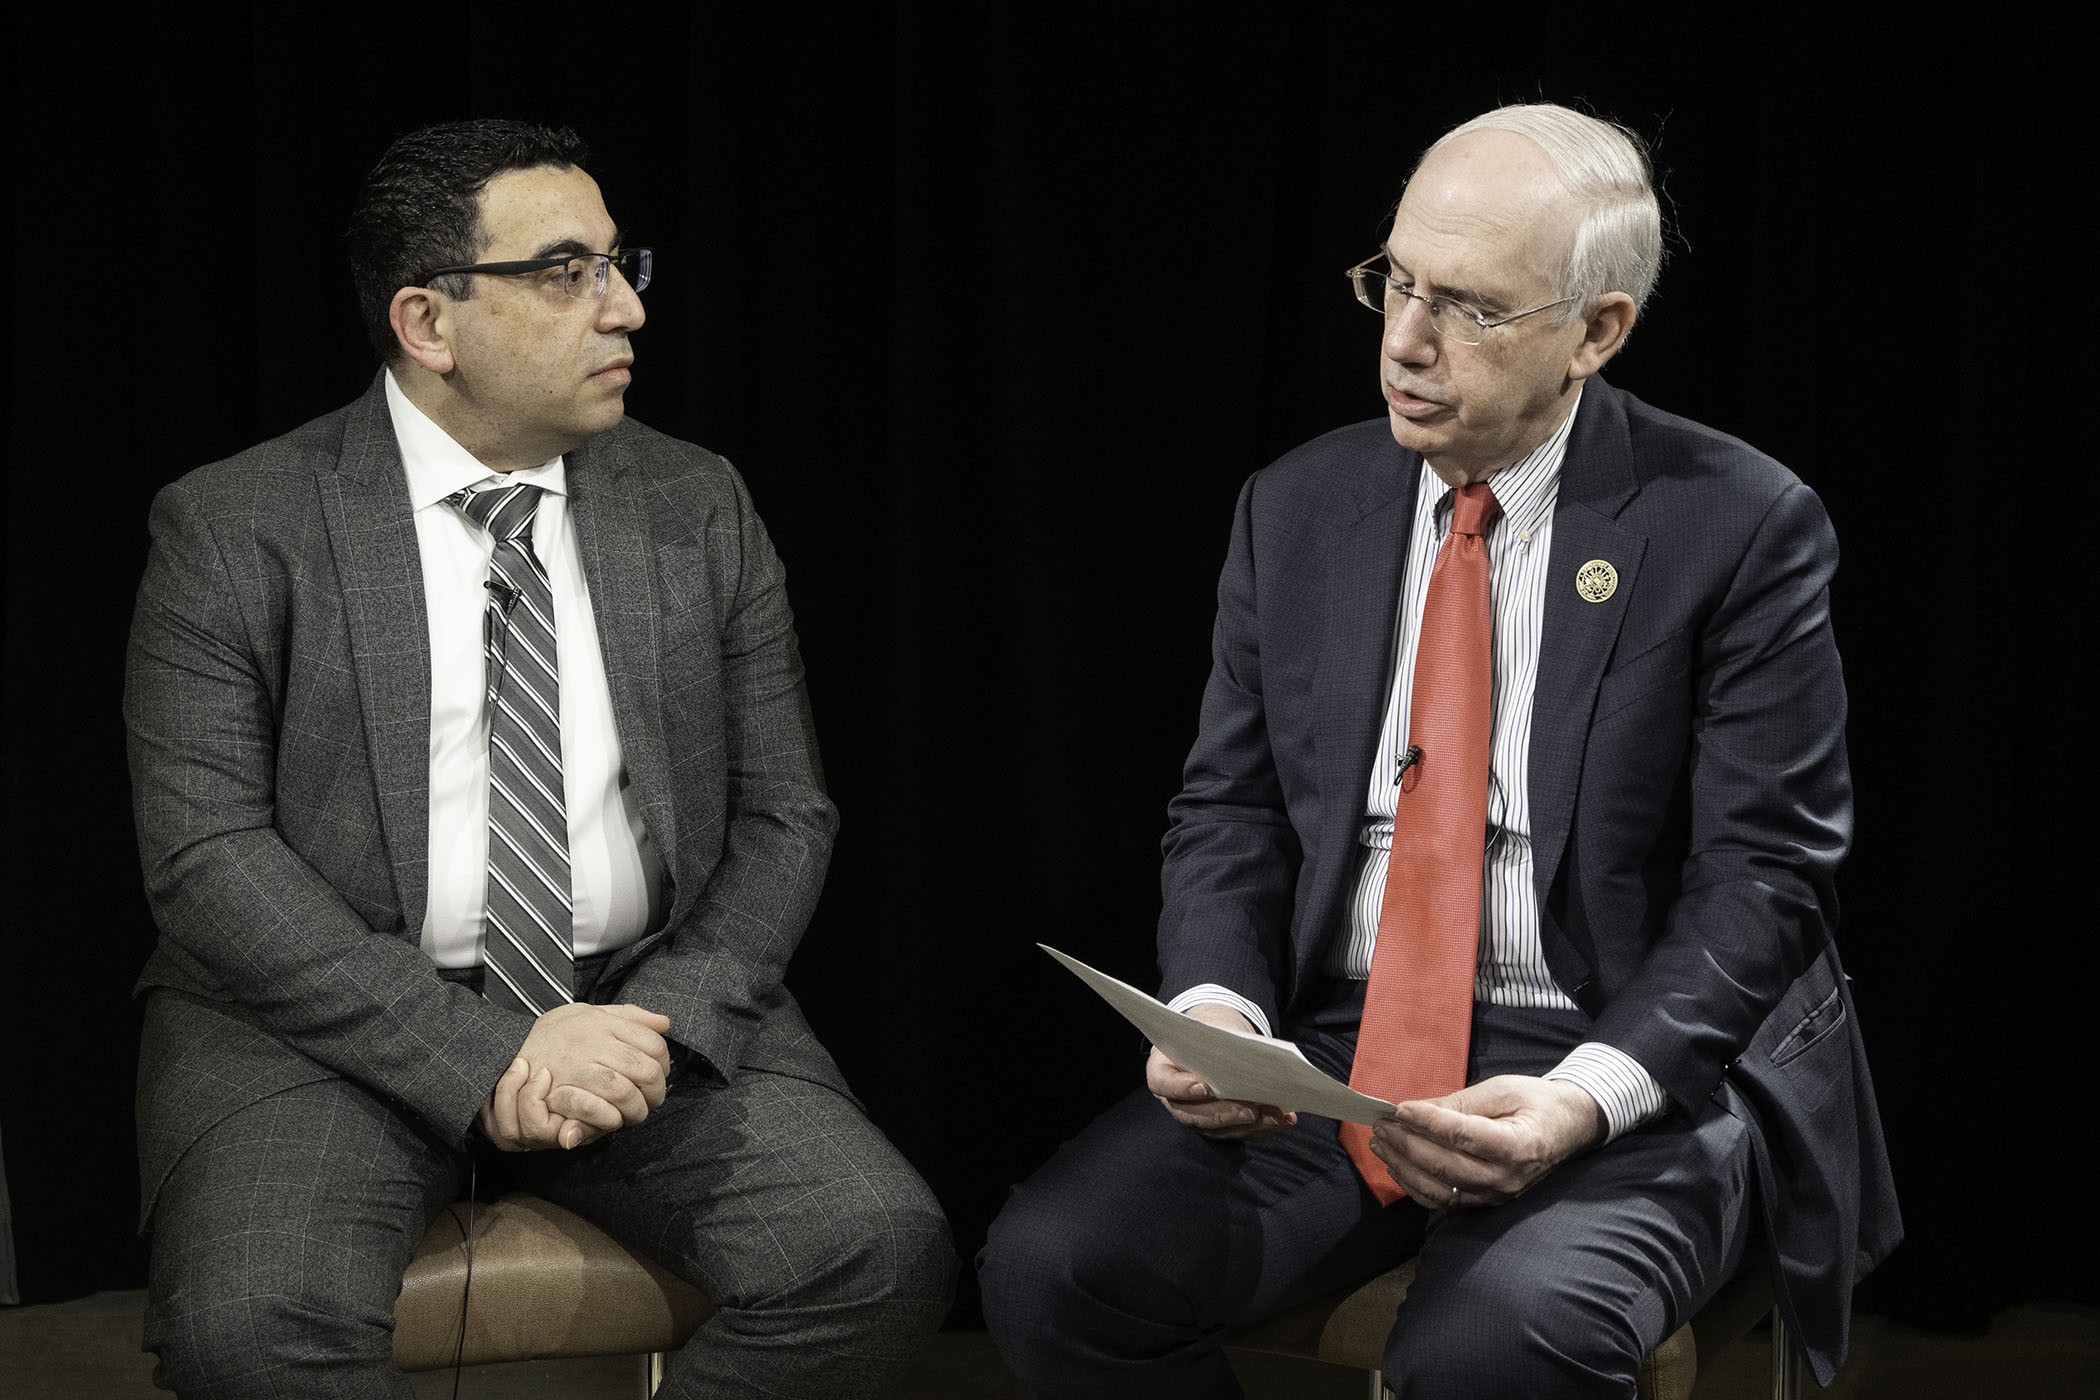 Joseph Khoury&comma; MD&comma; the Stokes-Shackleford Professor and Chair of the UNMC Department of Pathology&comma; Microbiology and Immunology&comma; with UNMC Chancellor Jeffrey P&period; Gold&comma; MD